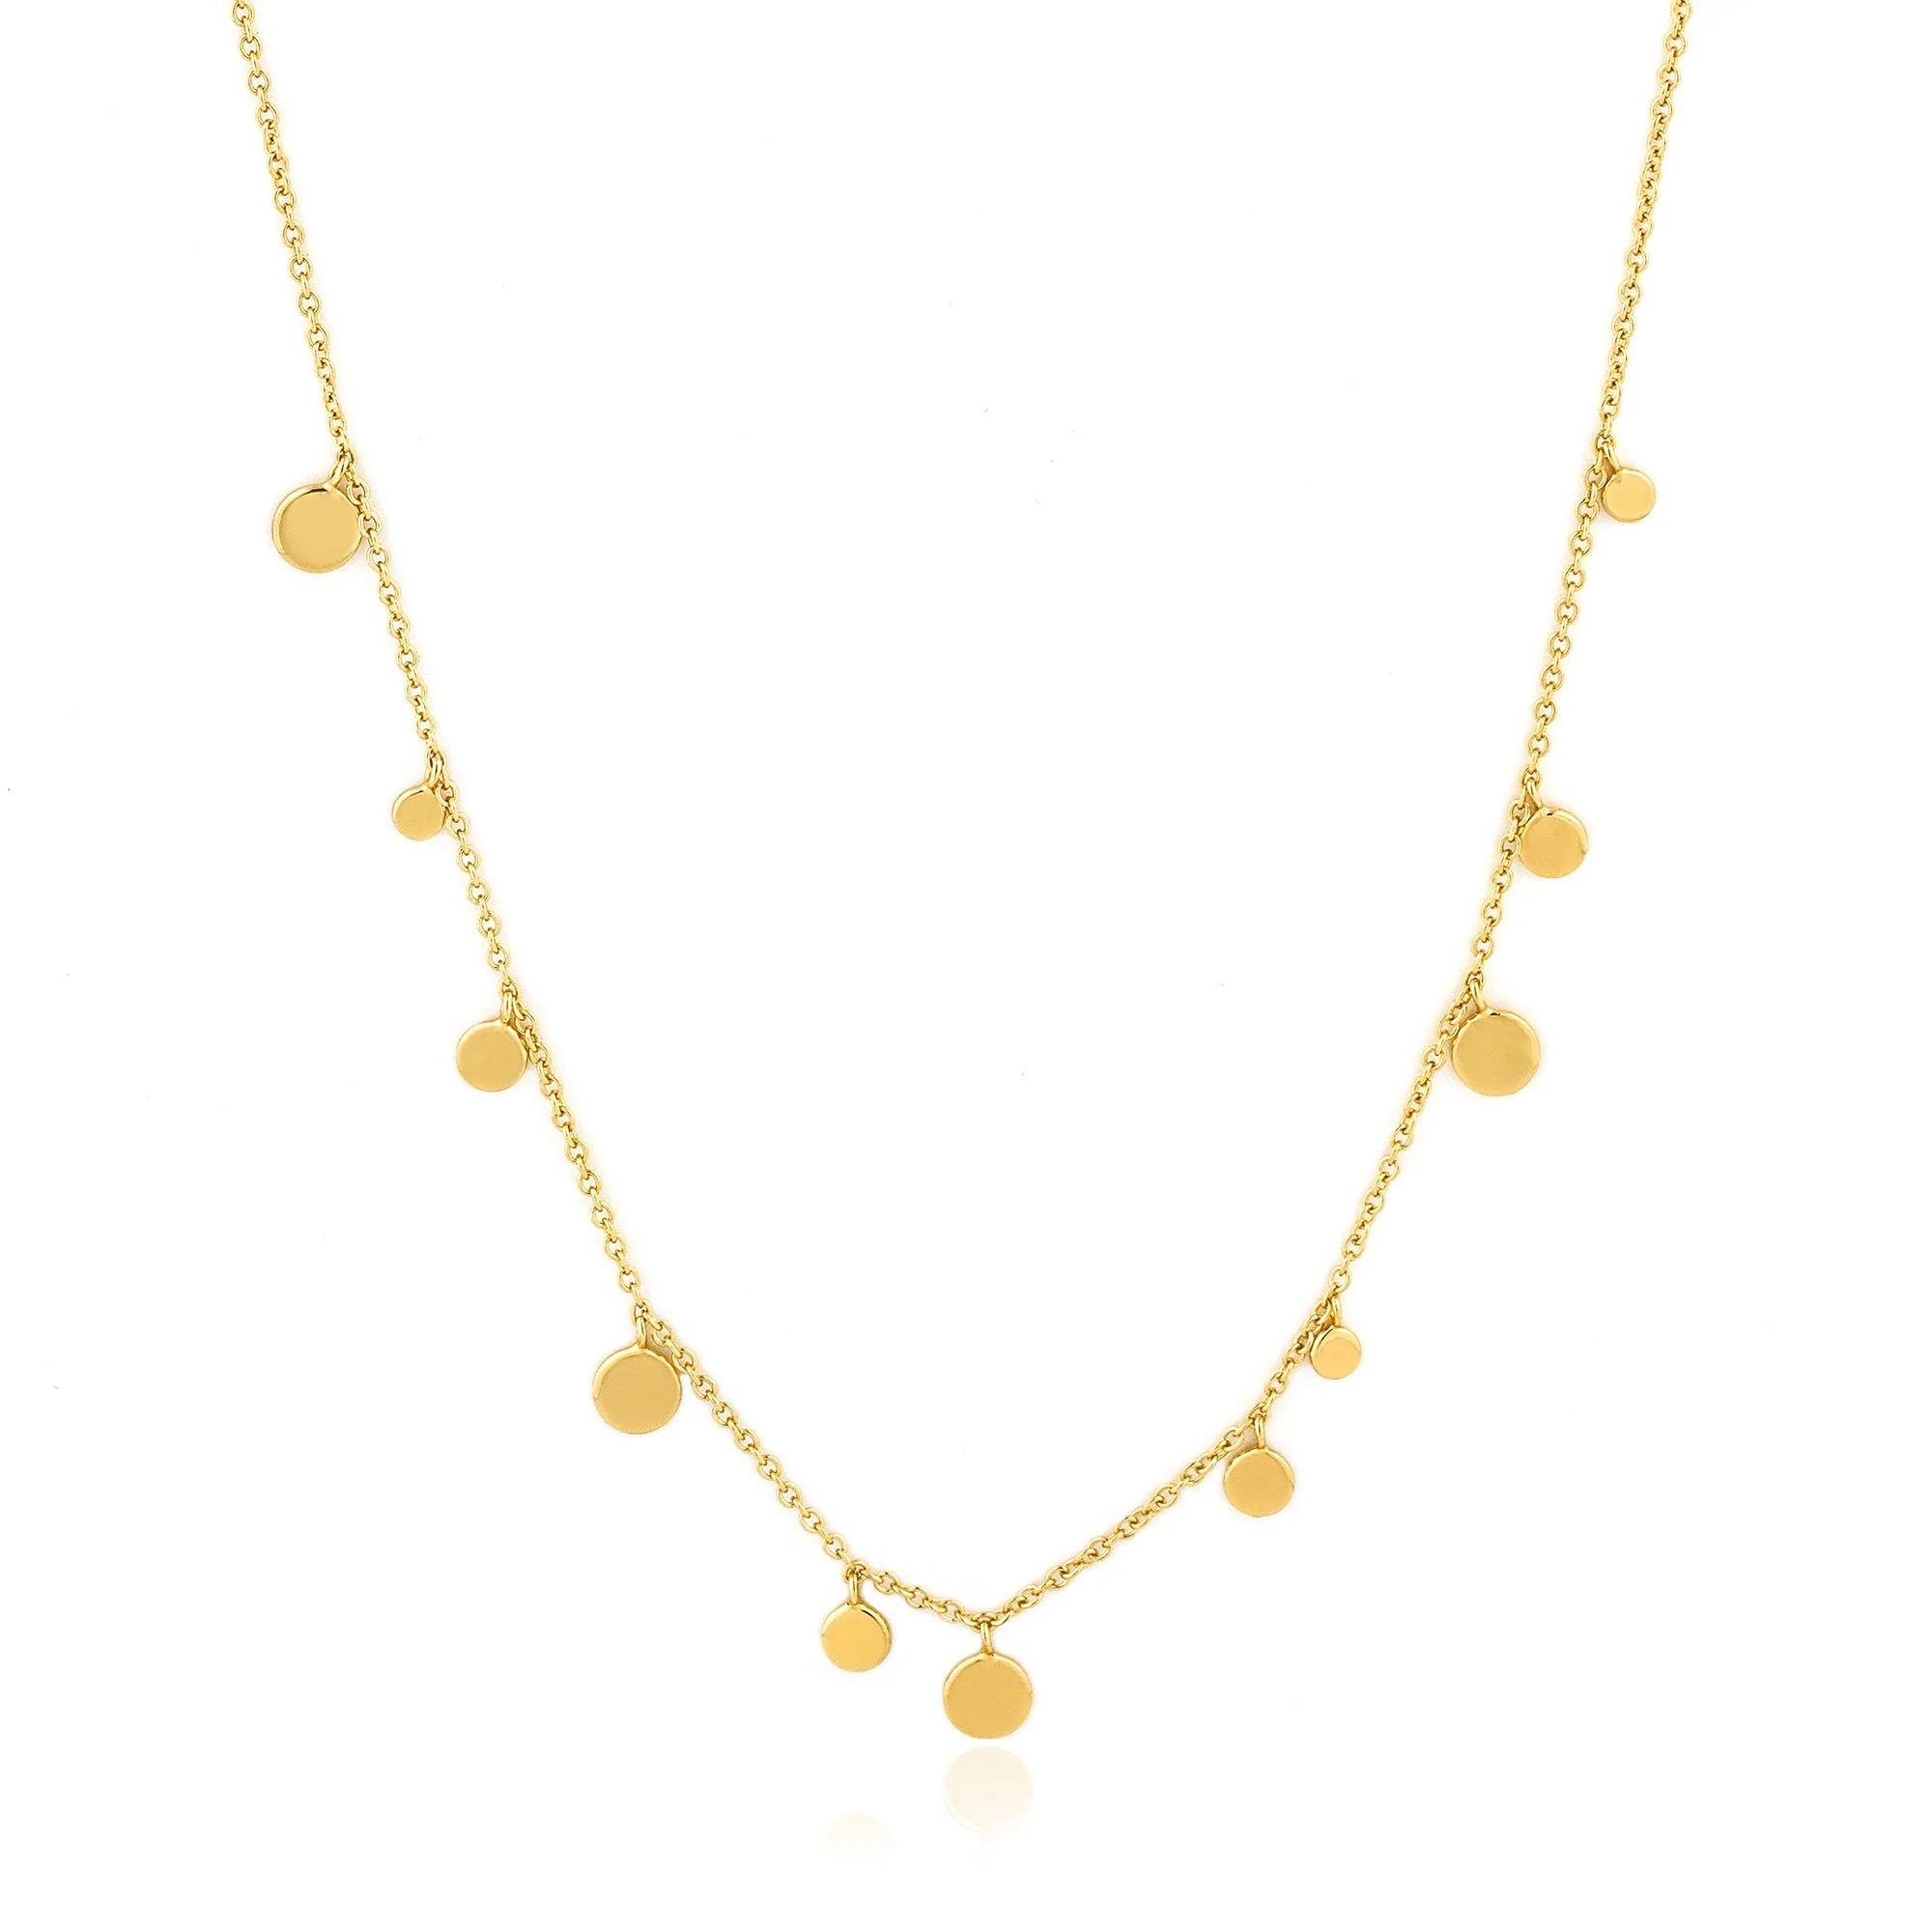 ANIA HAIE Geometry Mixed Discs Necklace, Gold-Plated